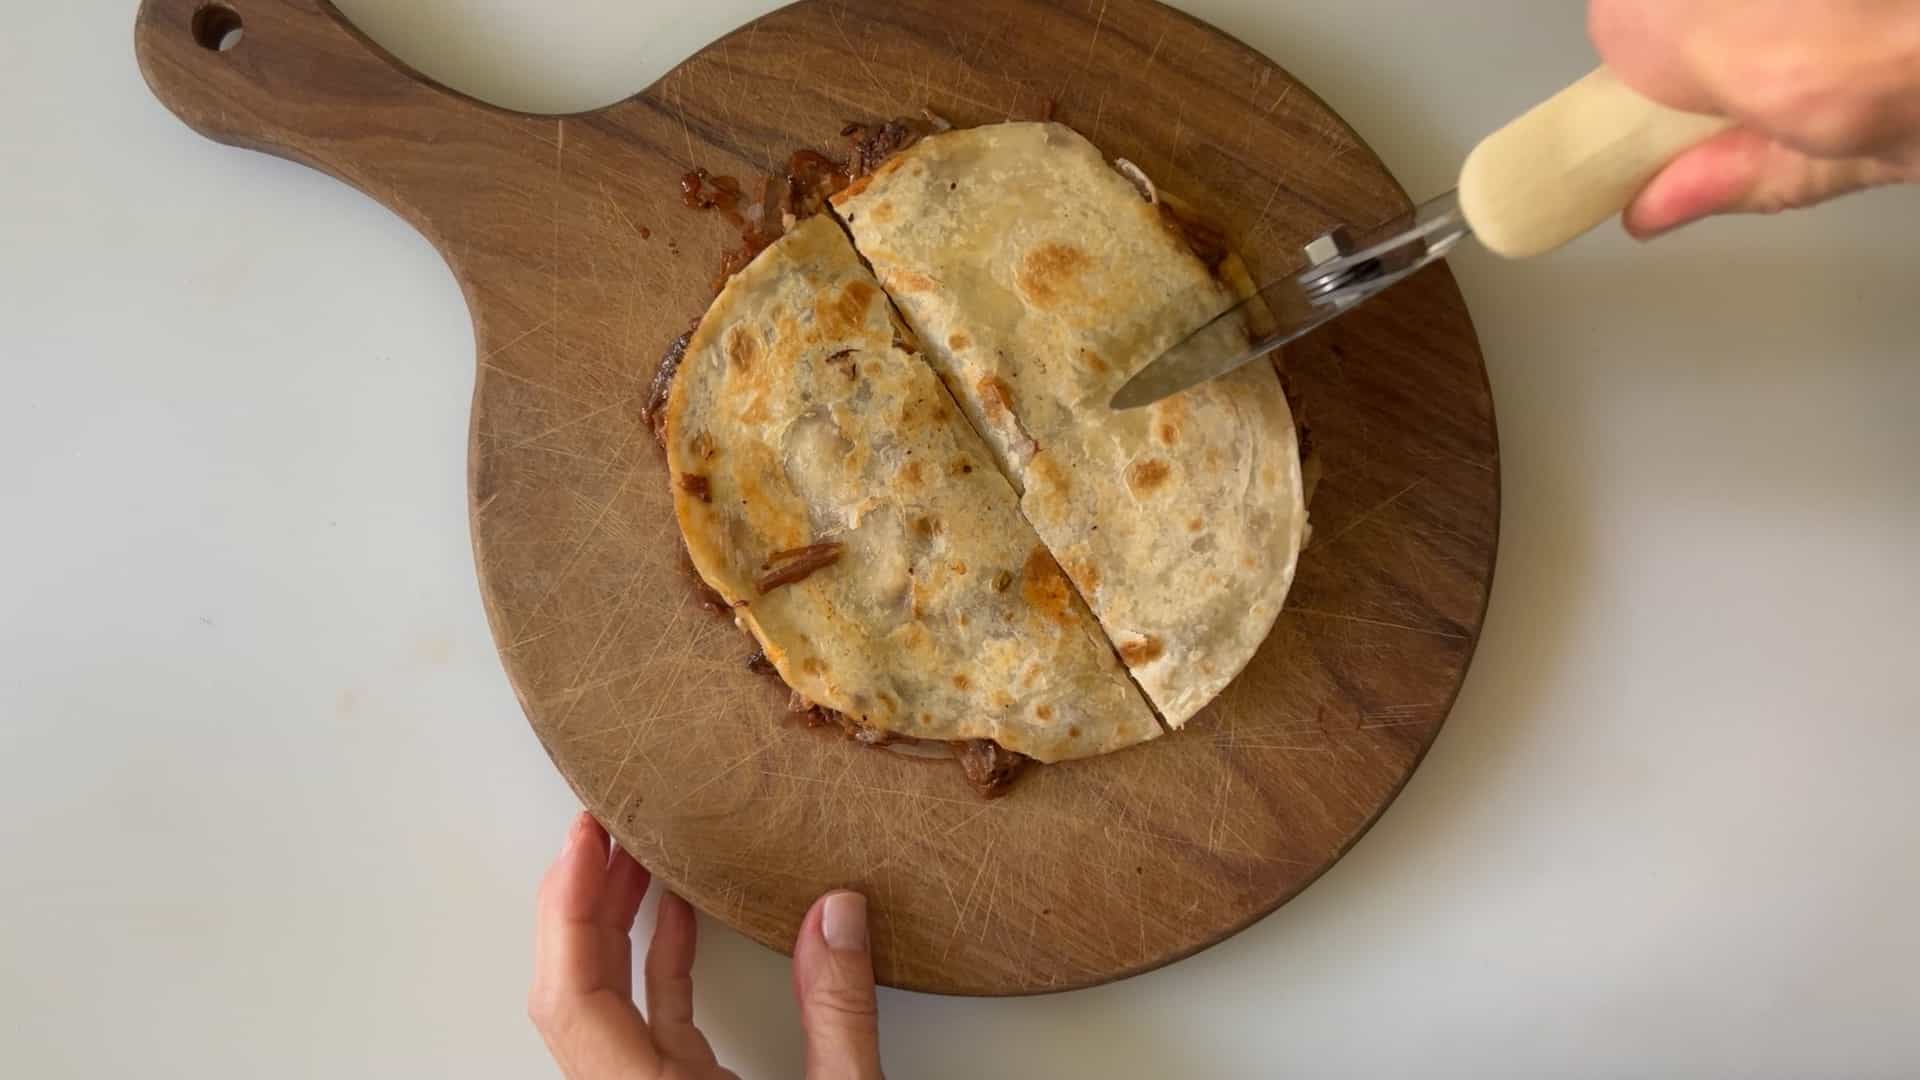 cutting baked tortilla with a pizza cutter.